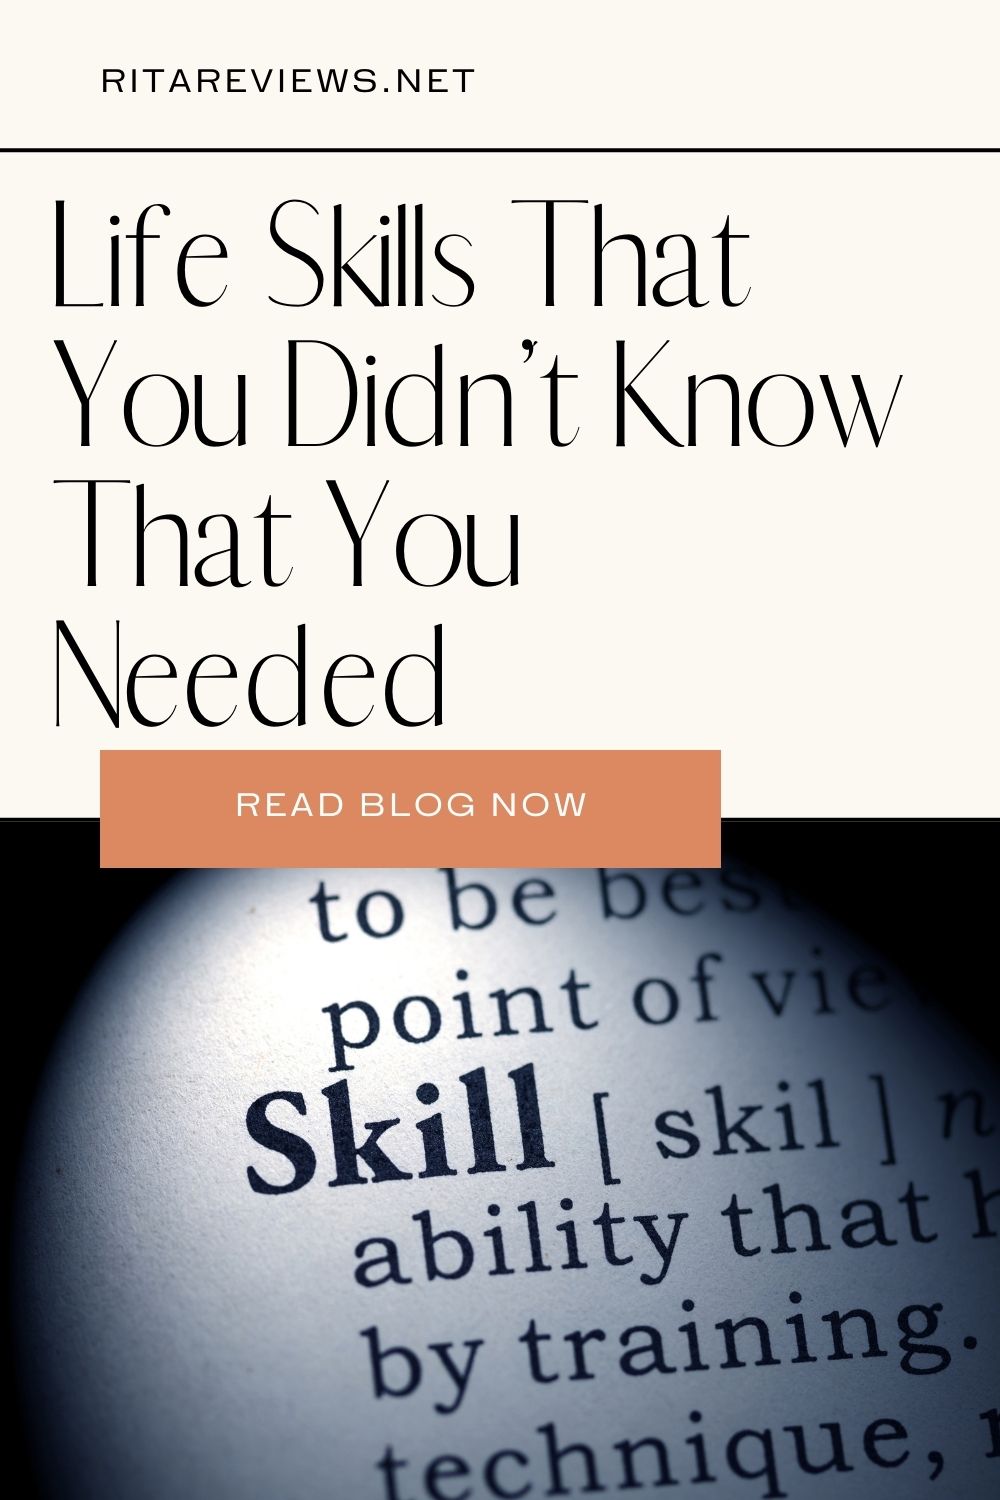 Life Skills That You Didn’t Know That You Needed